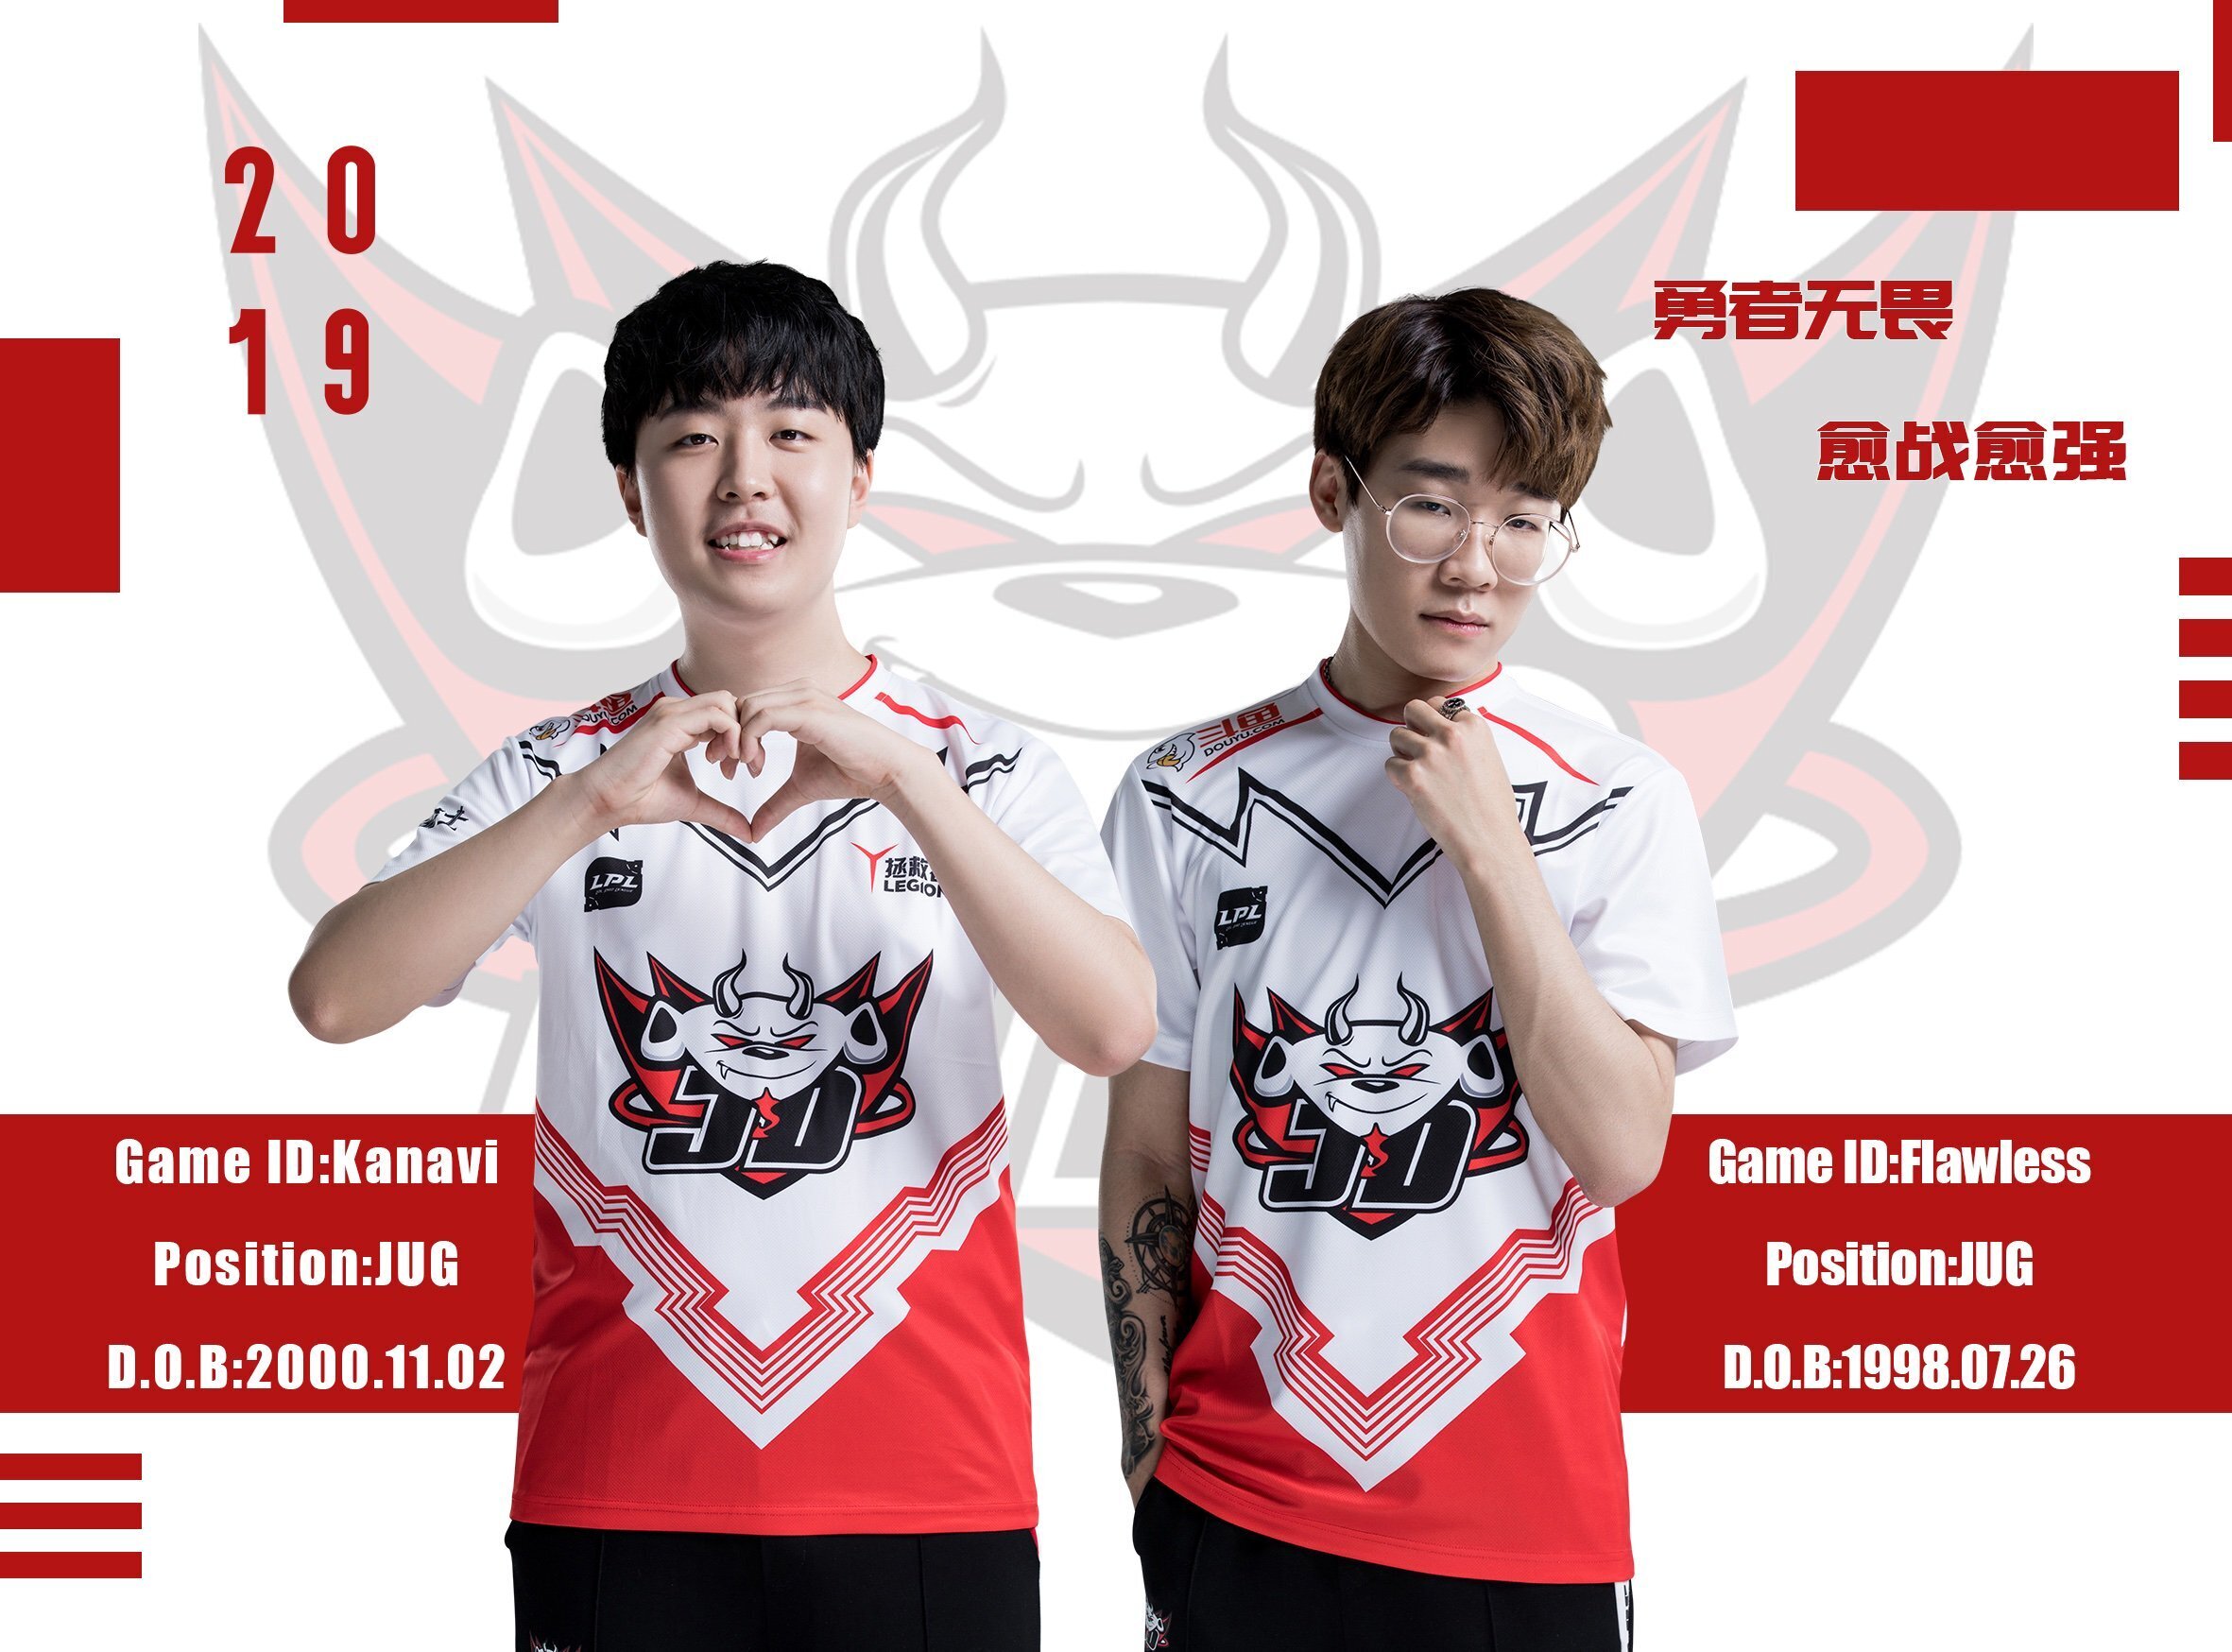 Even though that offered contract was not signed by Kanavi, the act of offering the contract was a violation of LPL rules (Image via JD Gaming)